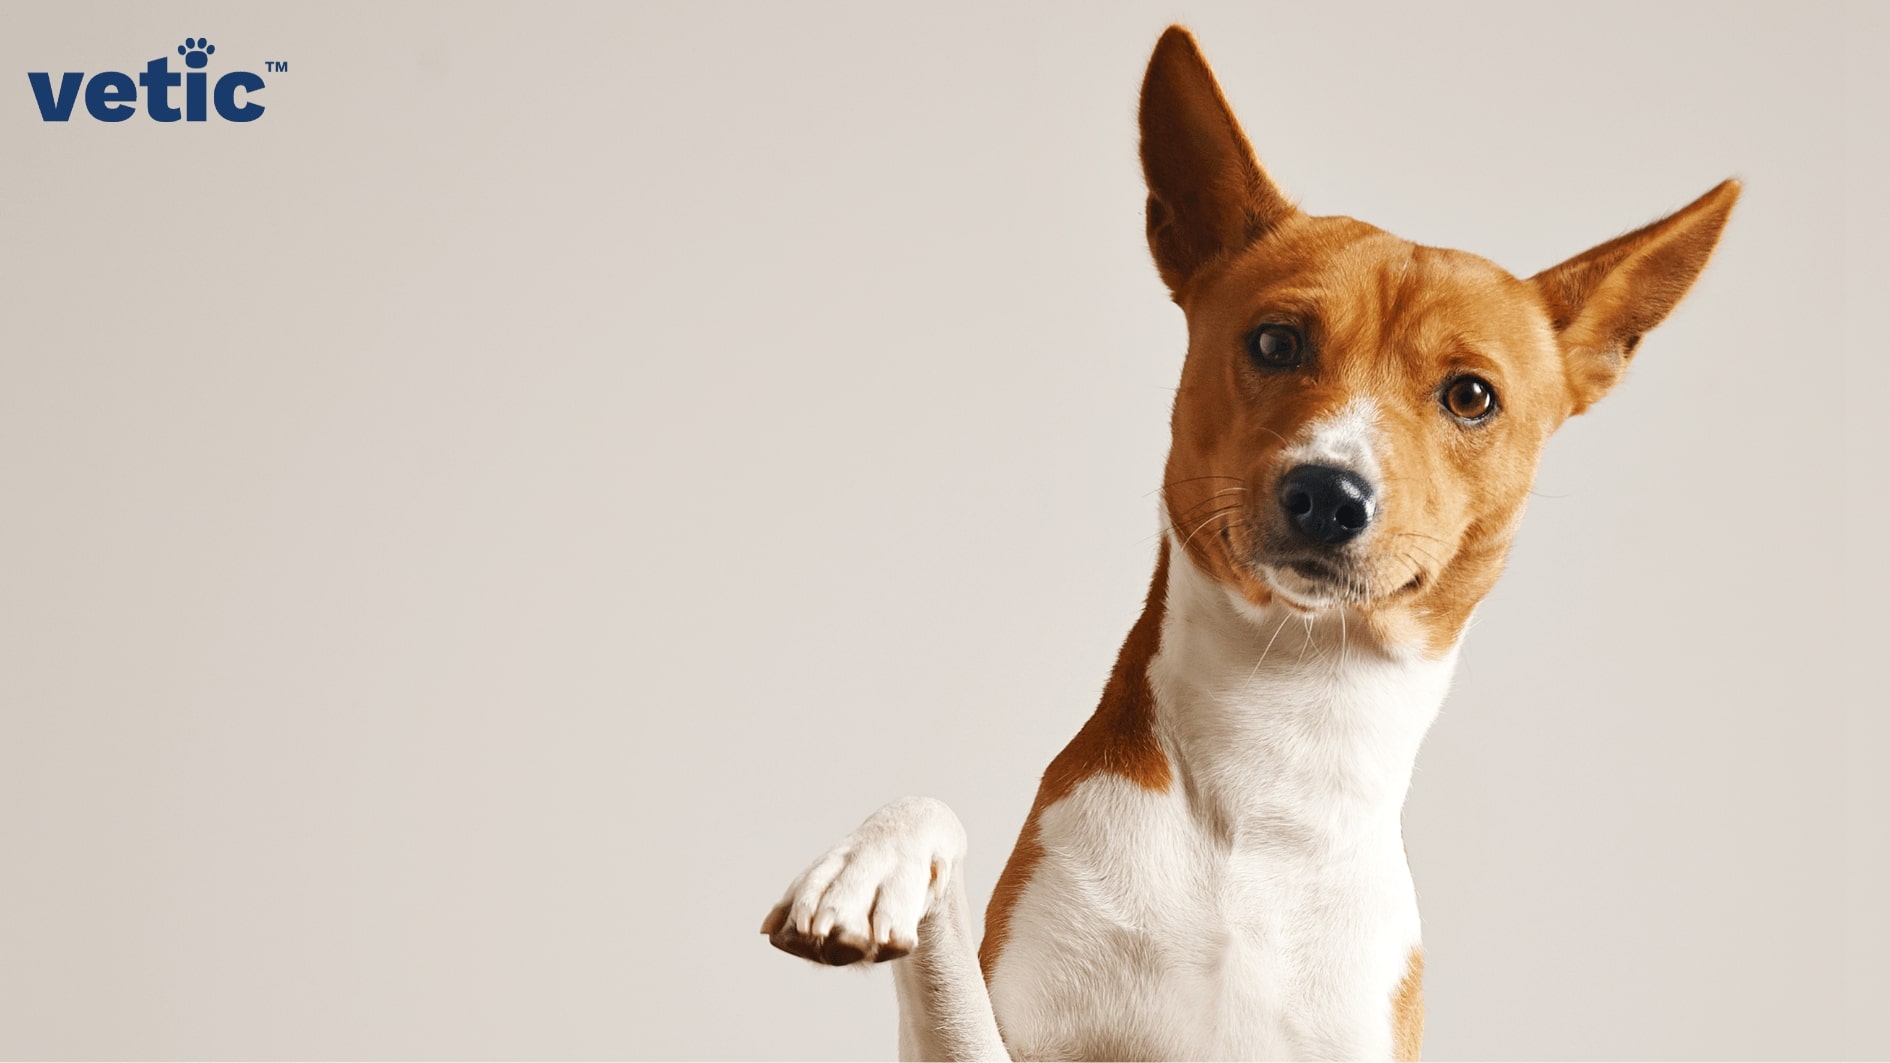 Why Does My Dog Urinate So Much? - My Pet Nutritionist